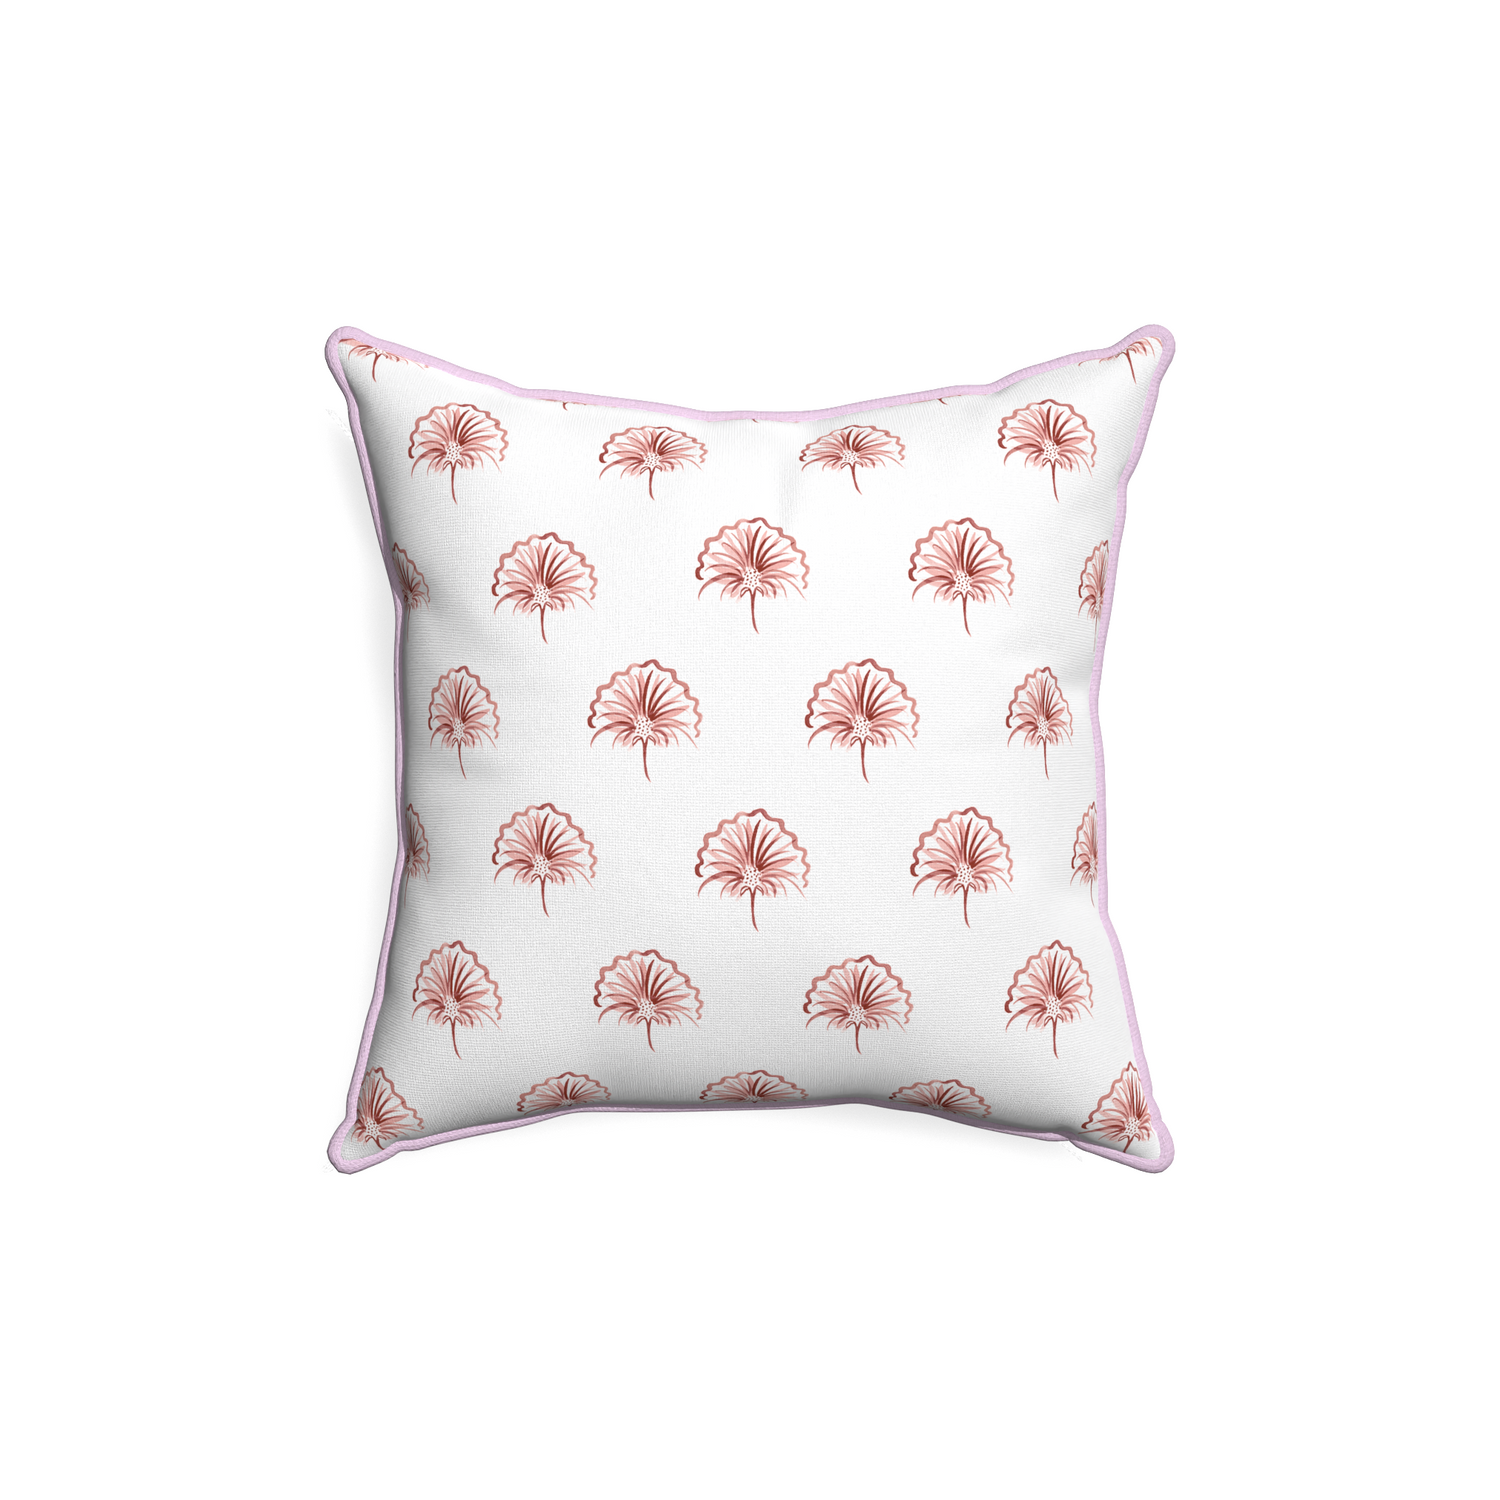 18-square penelope rose custom pillow with l piping on white background